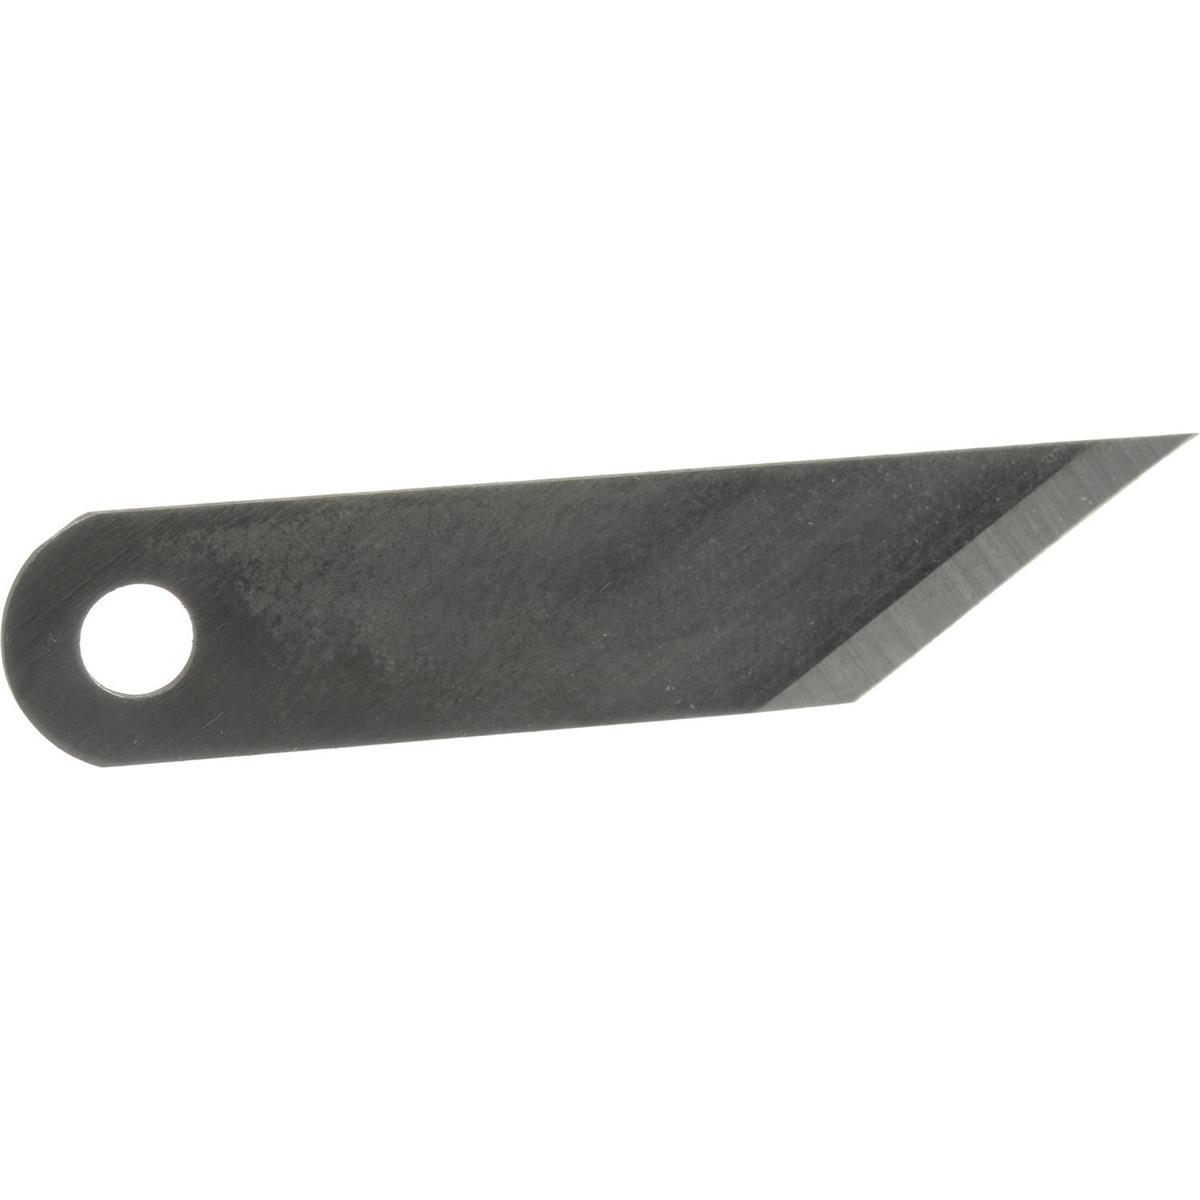 Image of Logan Graphics 324-20 Replacement Cutting Blades